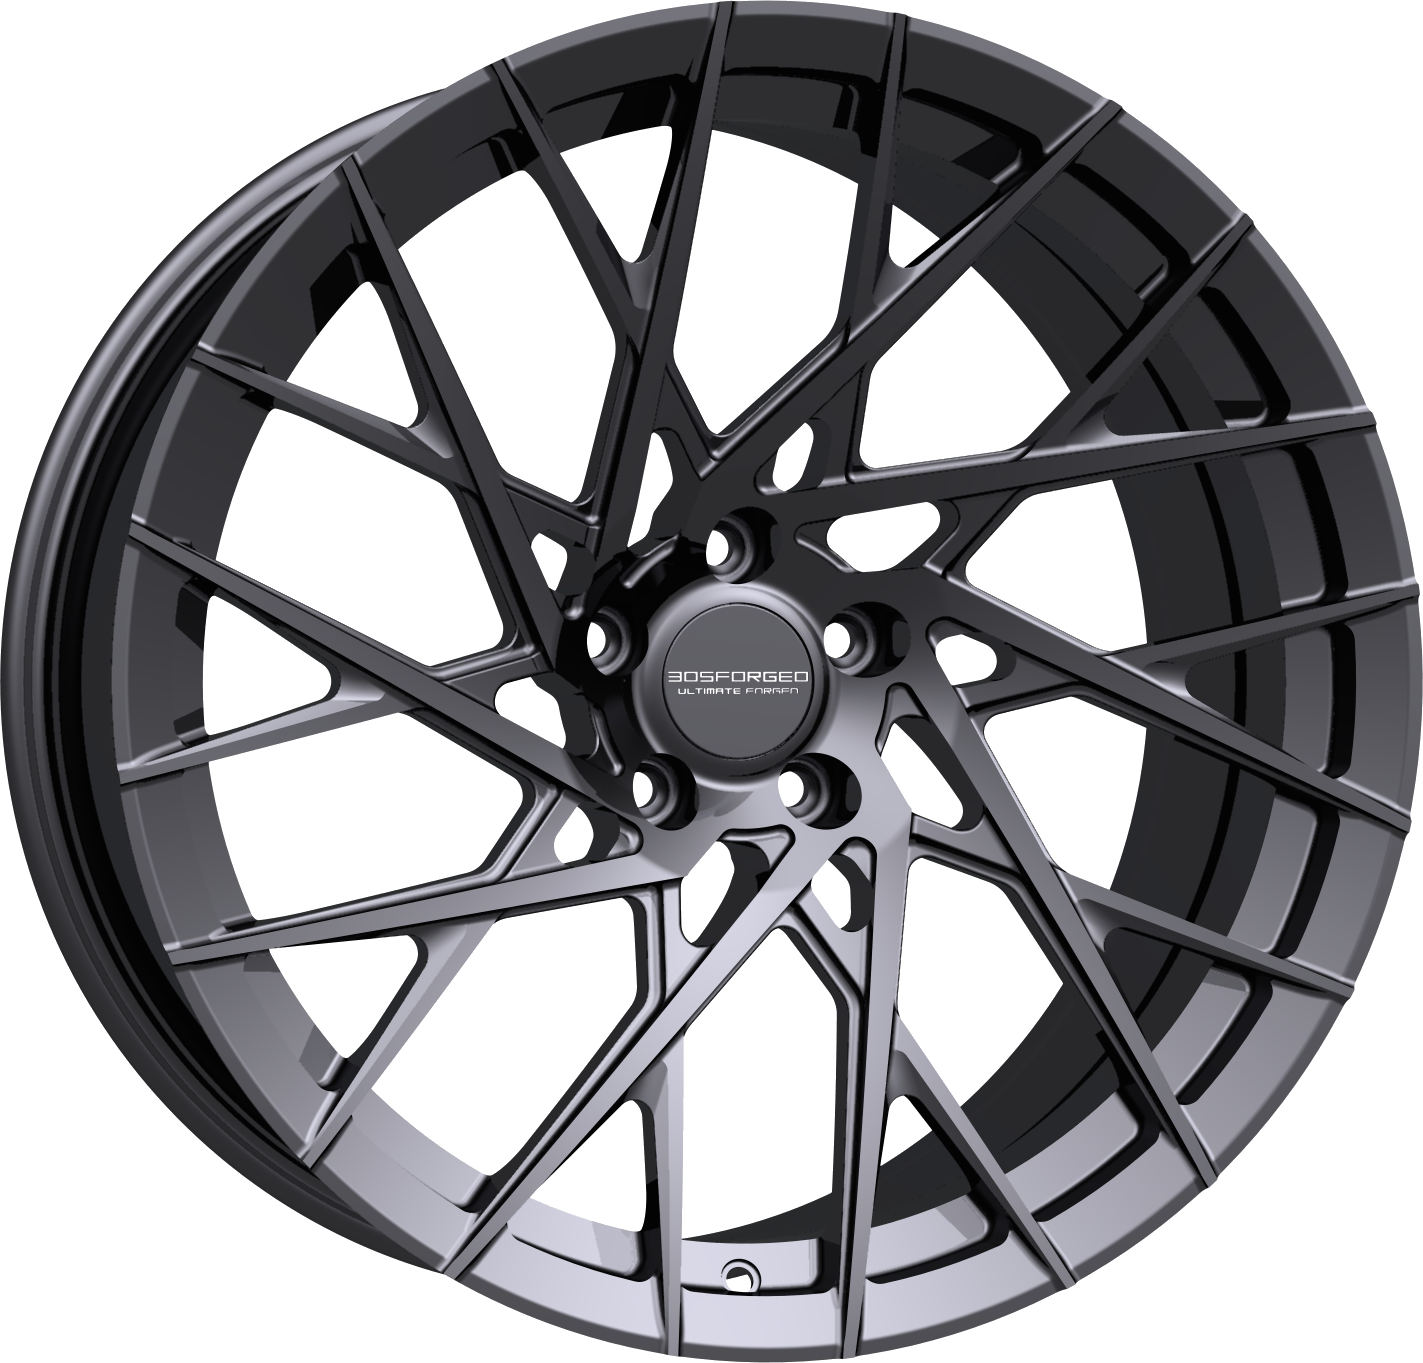 305 Forged UF117 forged wheels